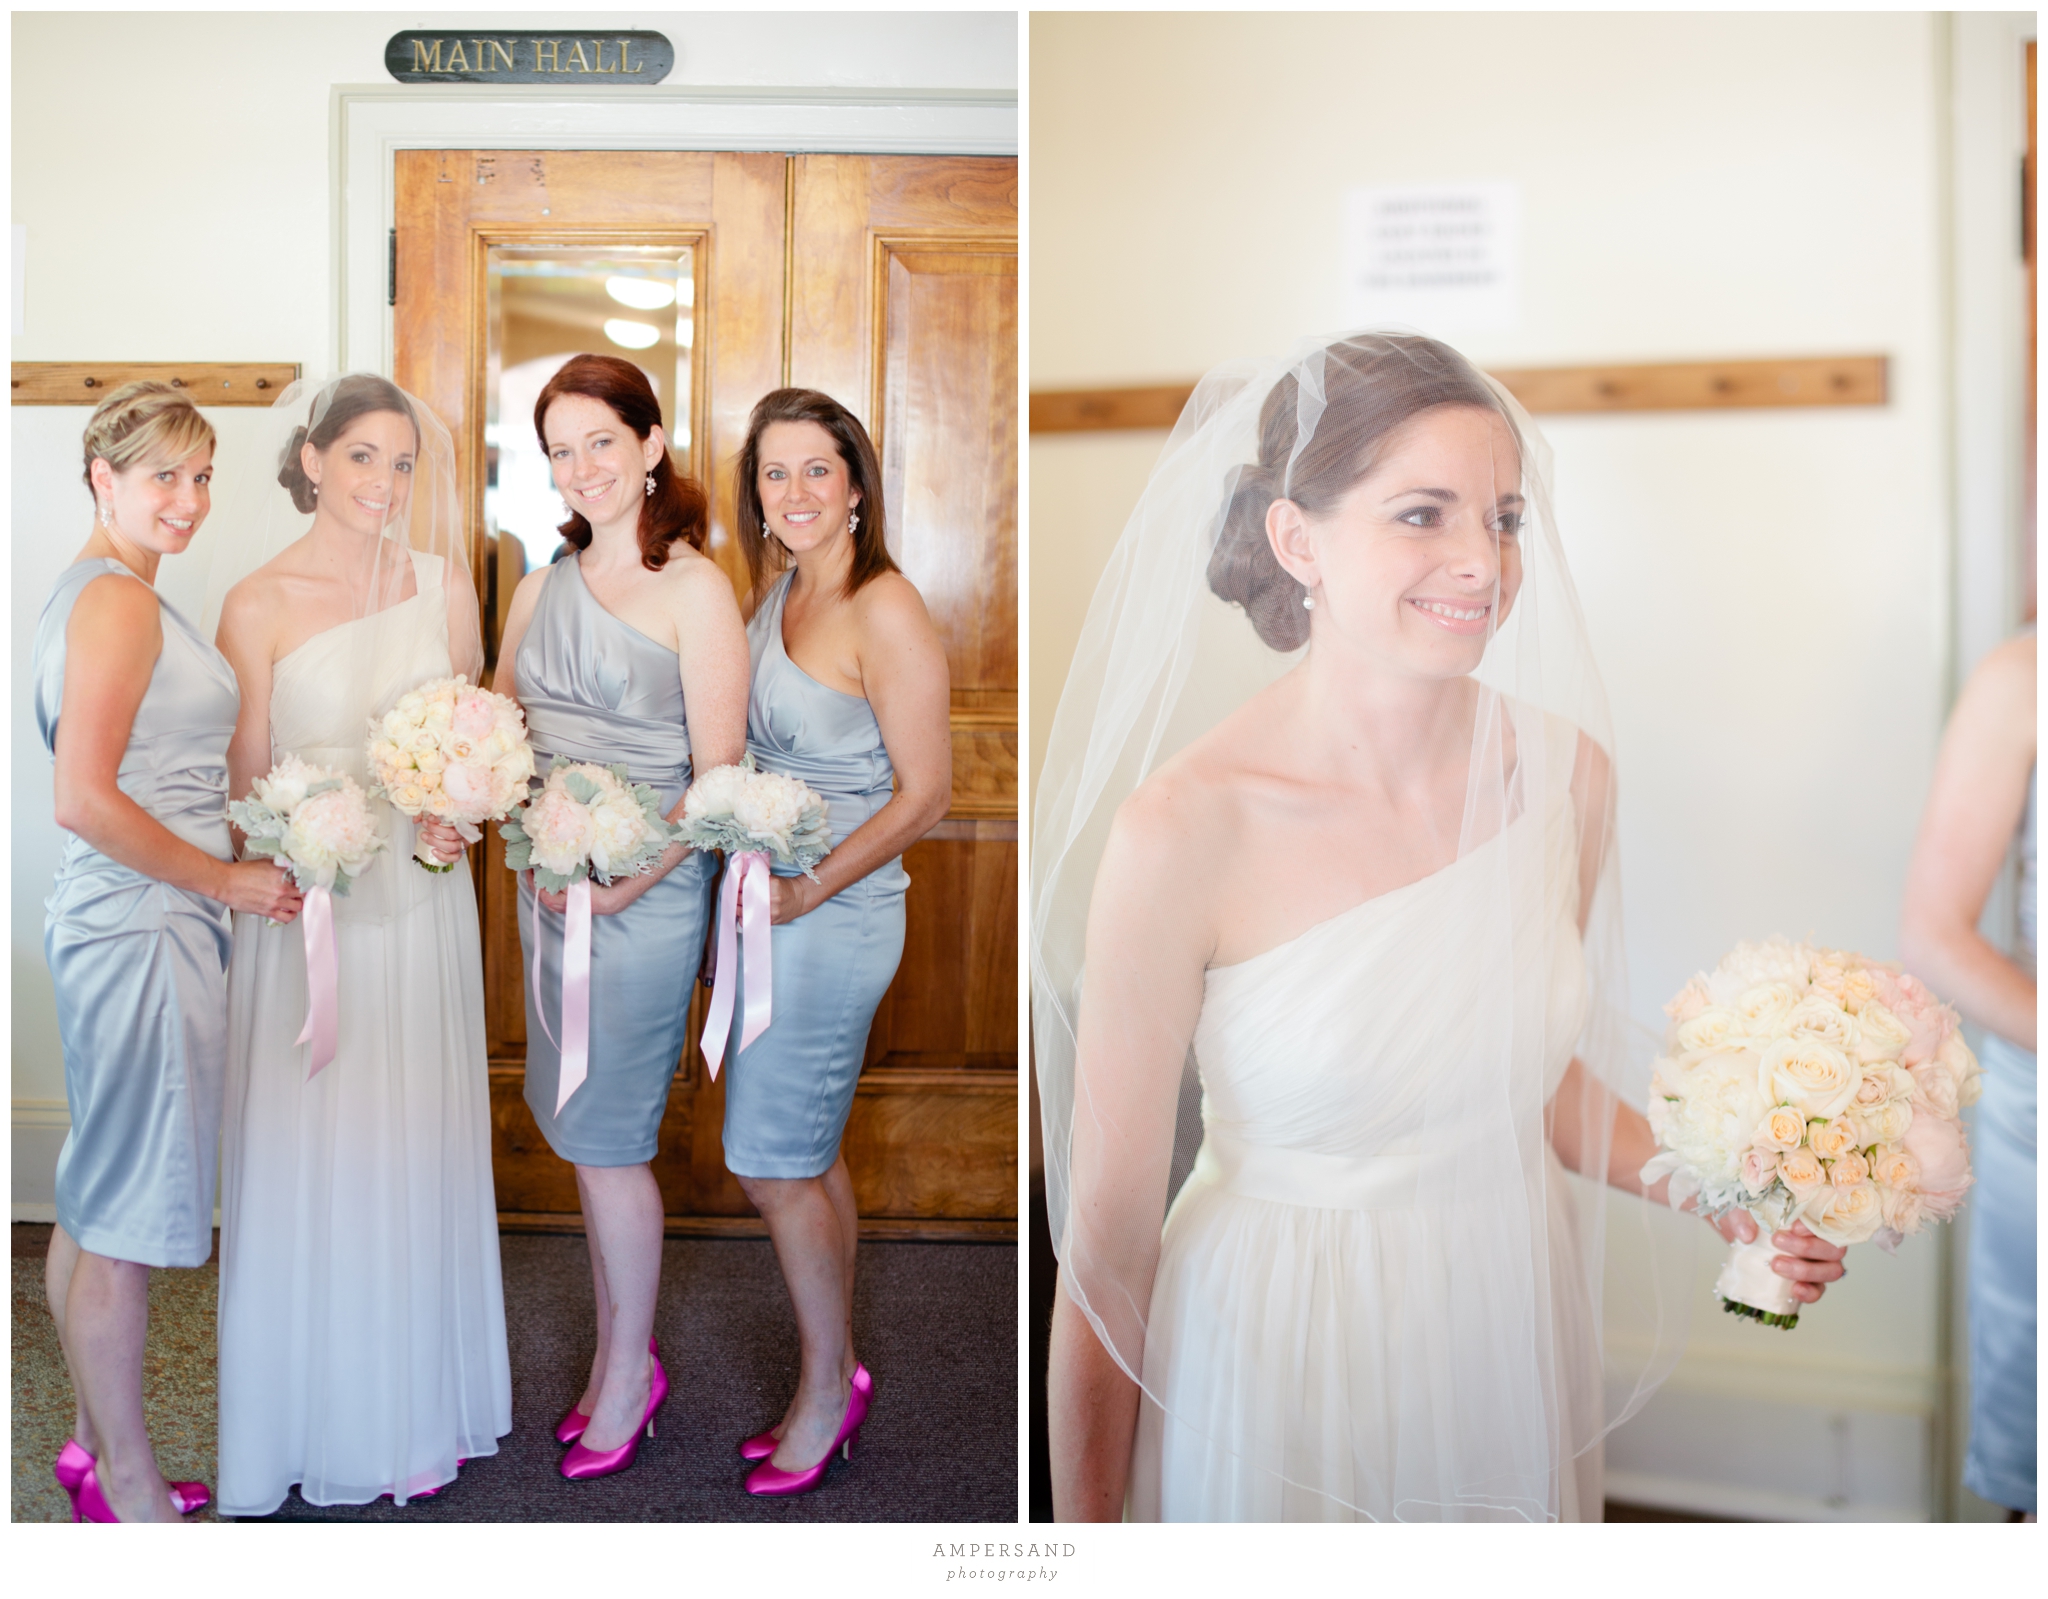 About to walk down the aisle at Capitol Hill Baptist Church // Photos by Ampersand Photography